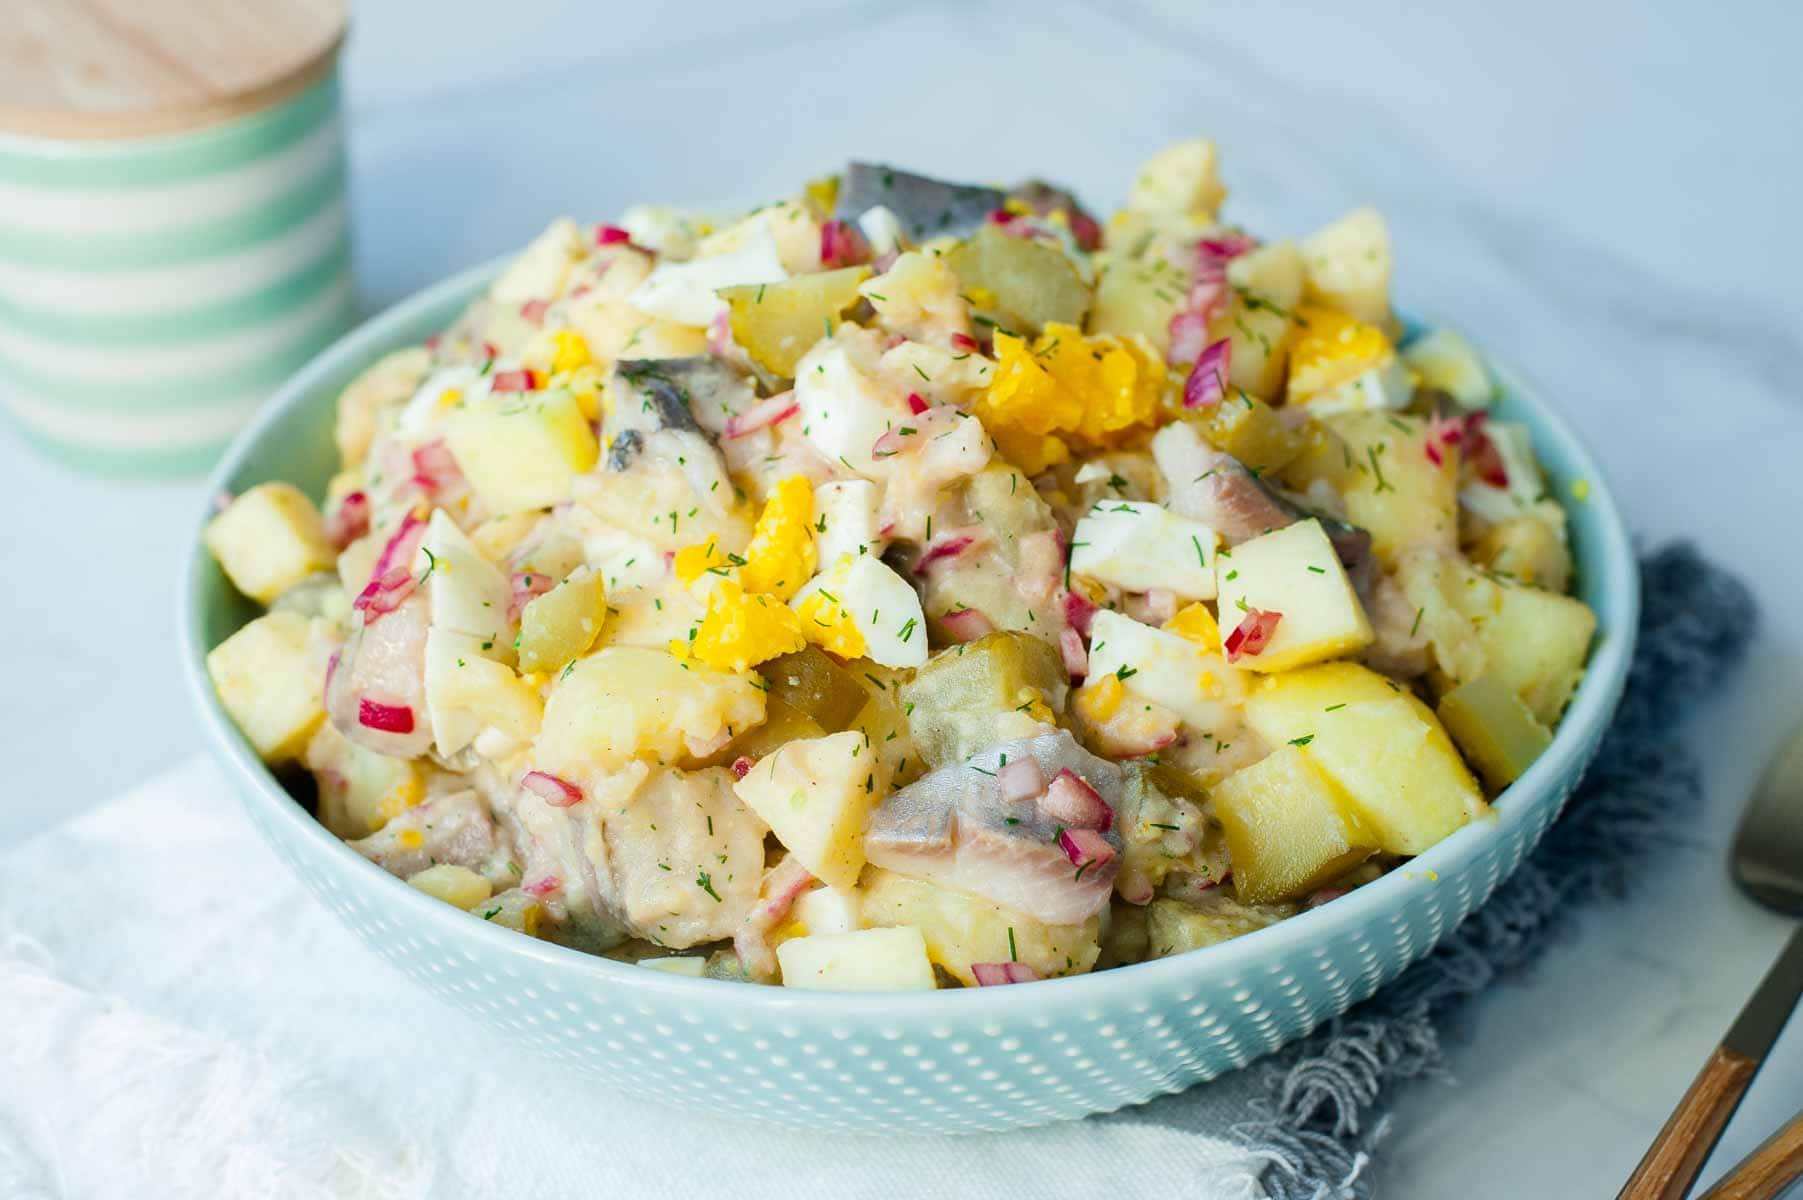 Herring salad with eggs, potatoes, and cucumbers in brine ib a green bowl.